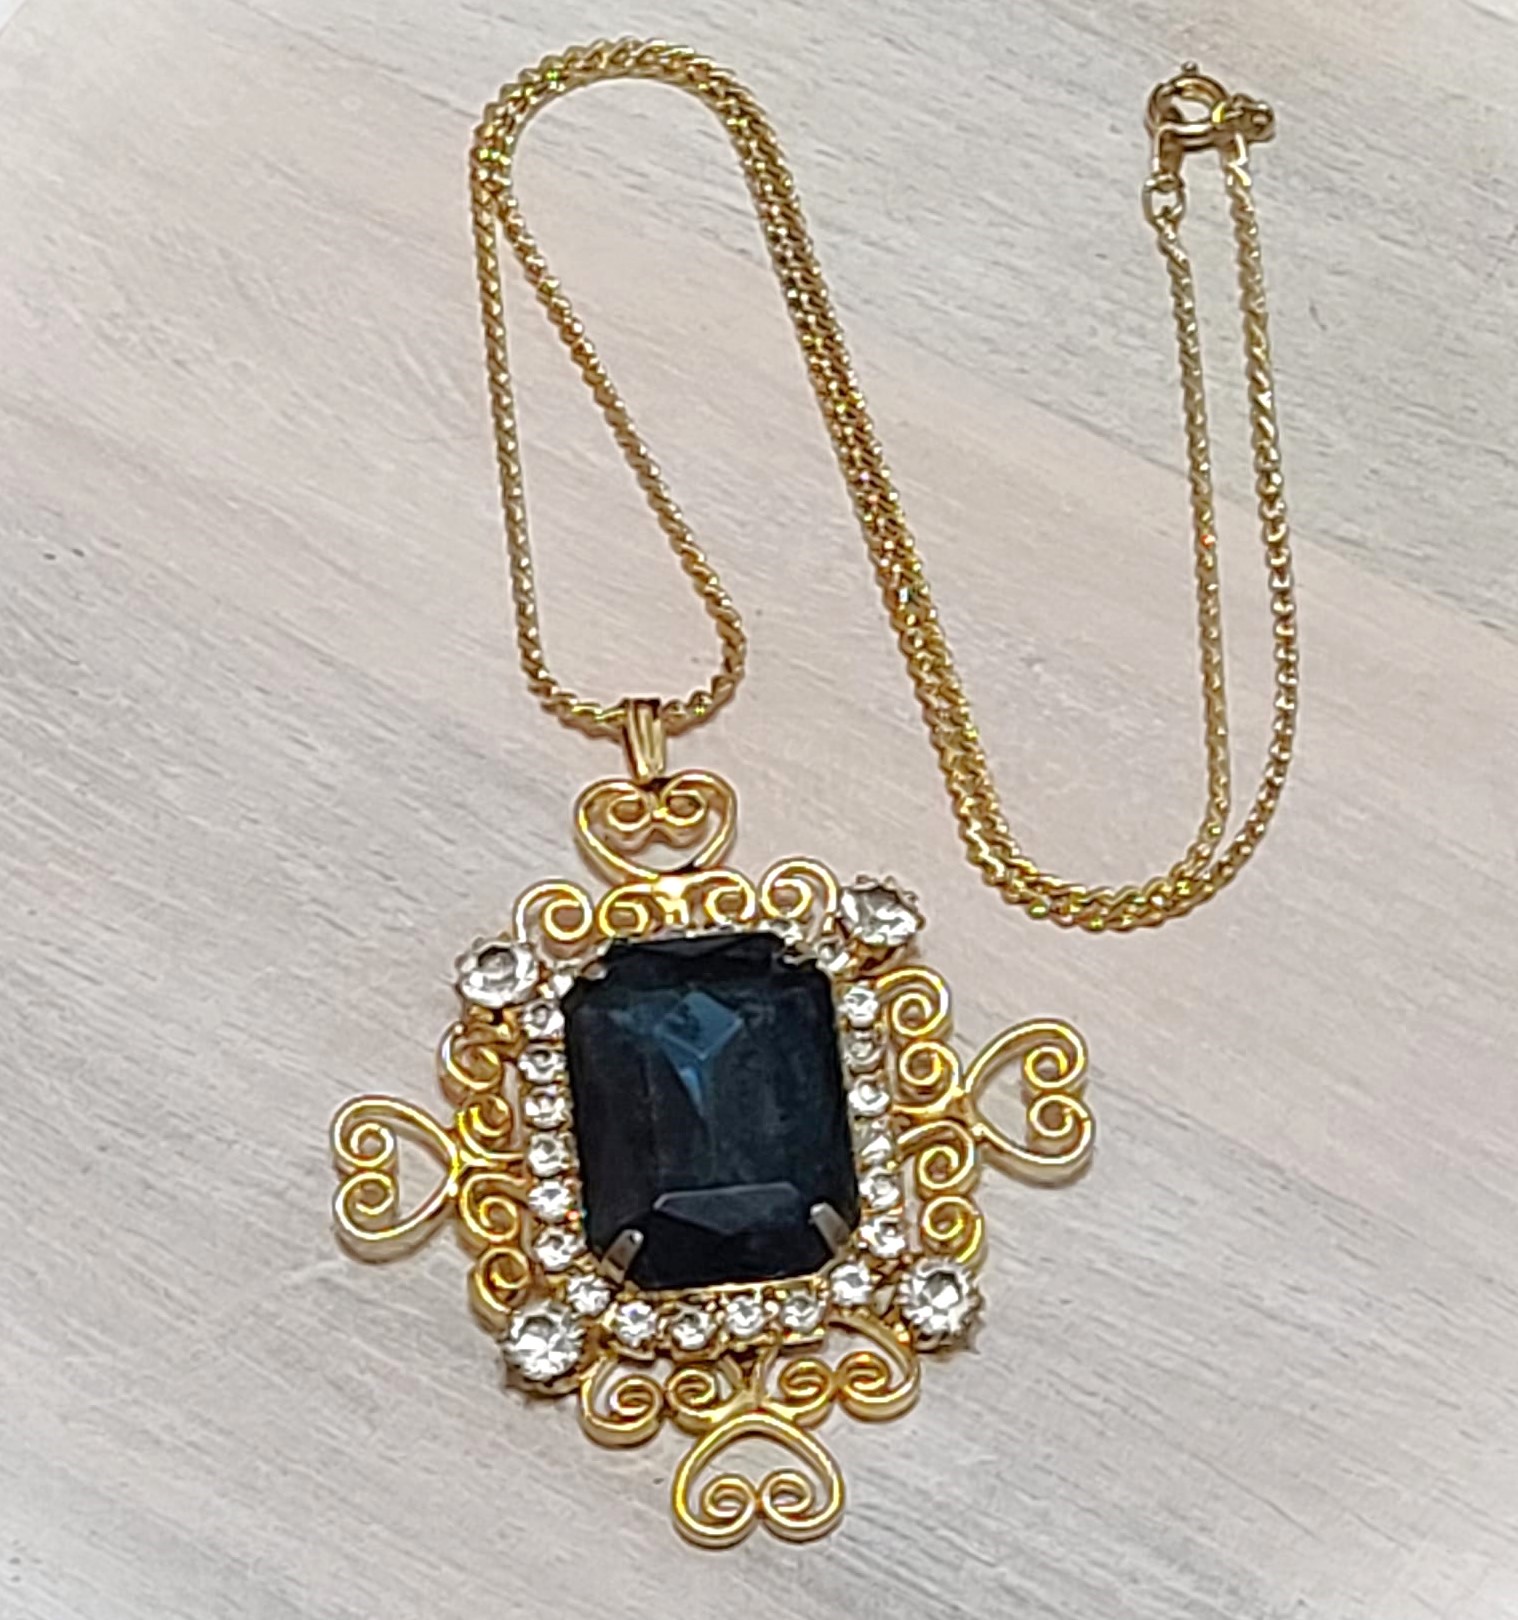 Vintage blue sapphire rhinestone pendant necklace with chain